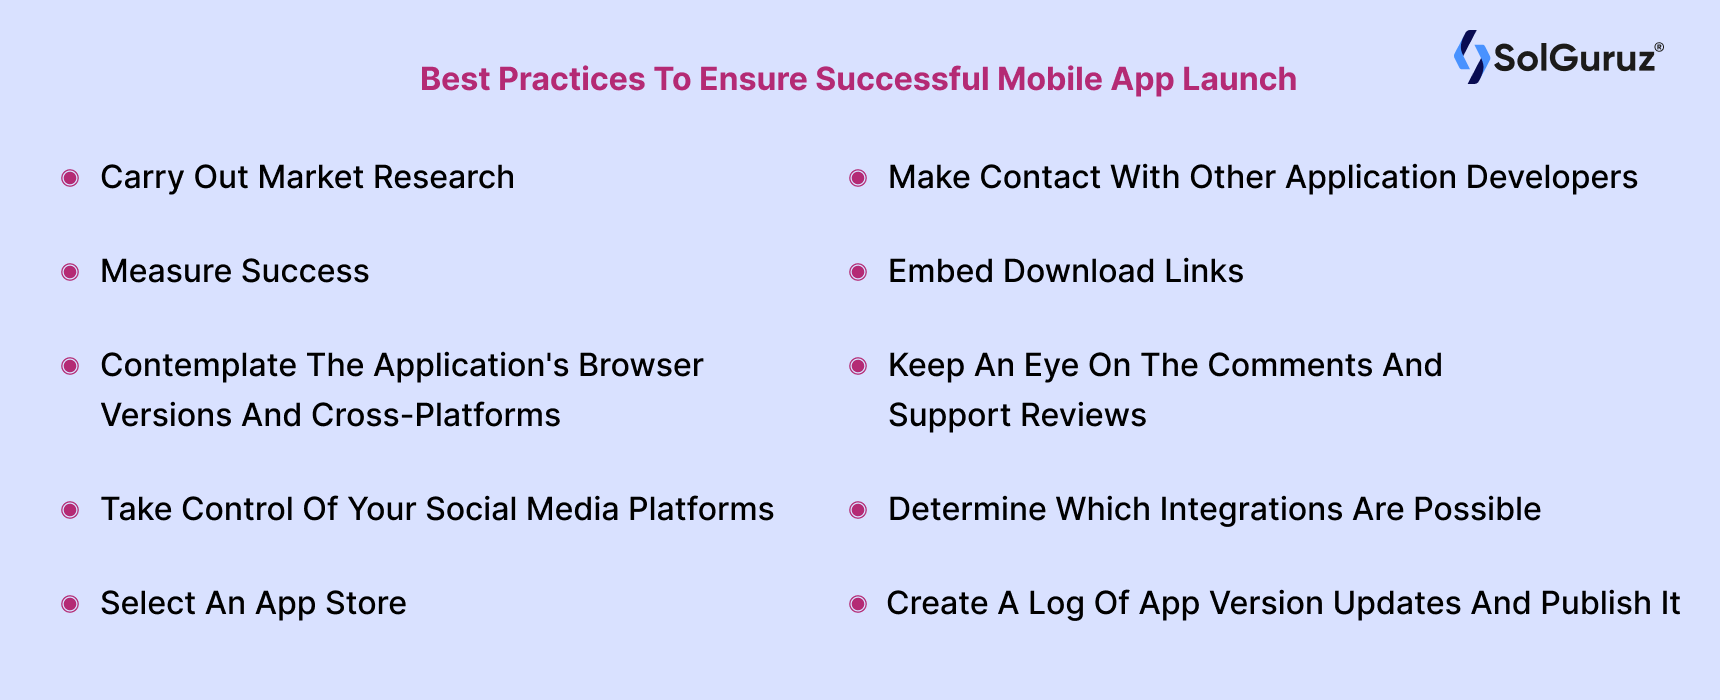 Best Practices to ensure successful mobile app launch